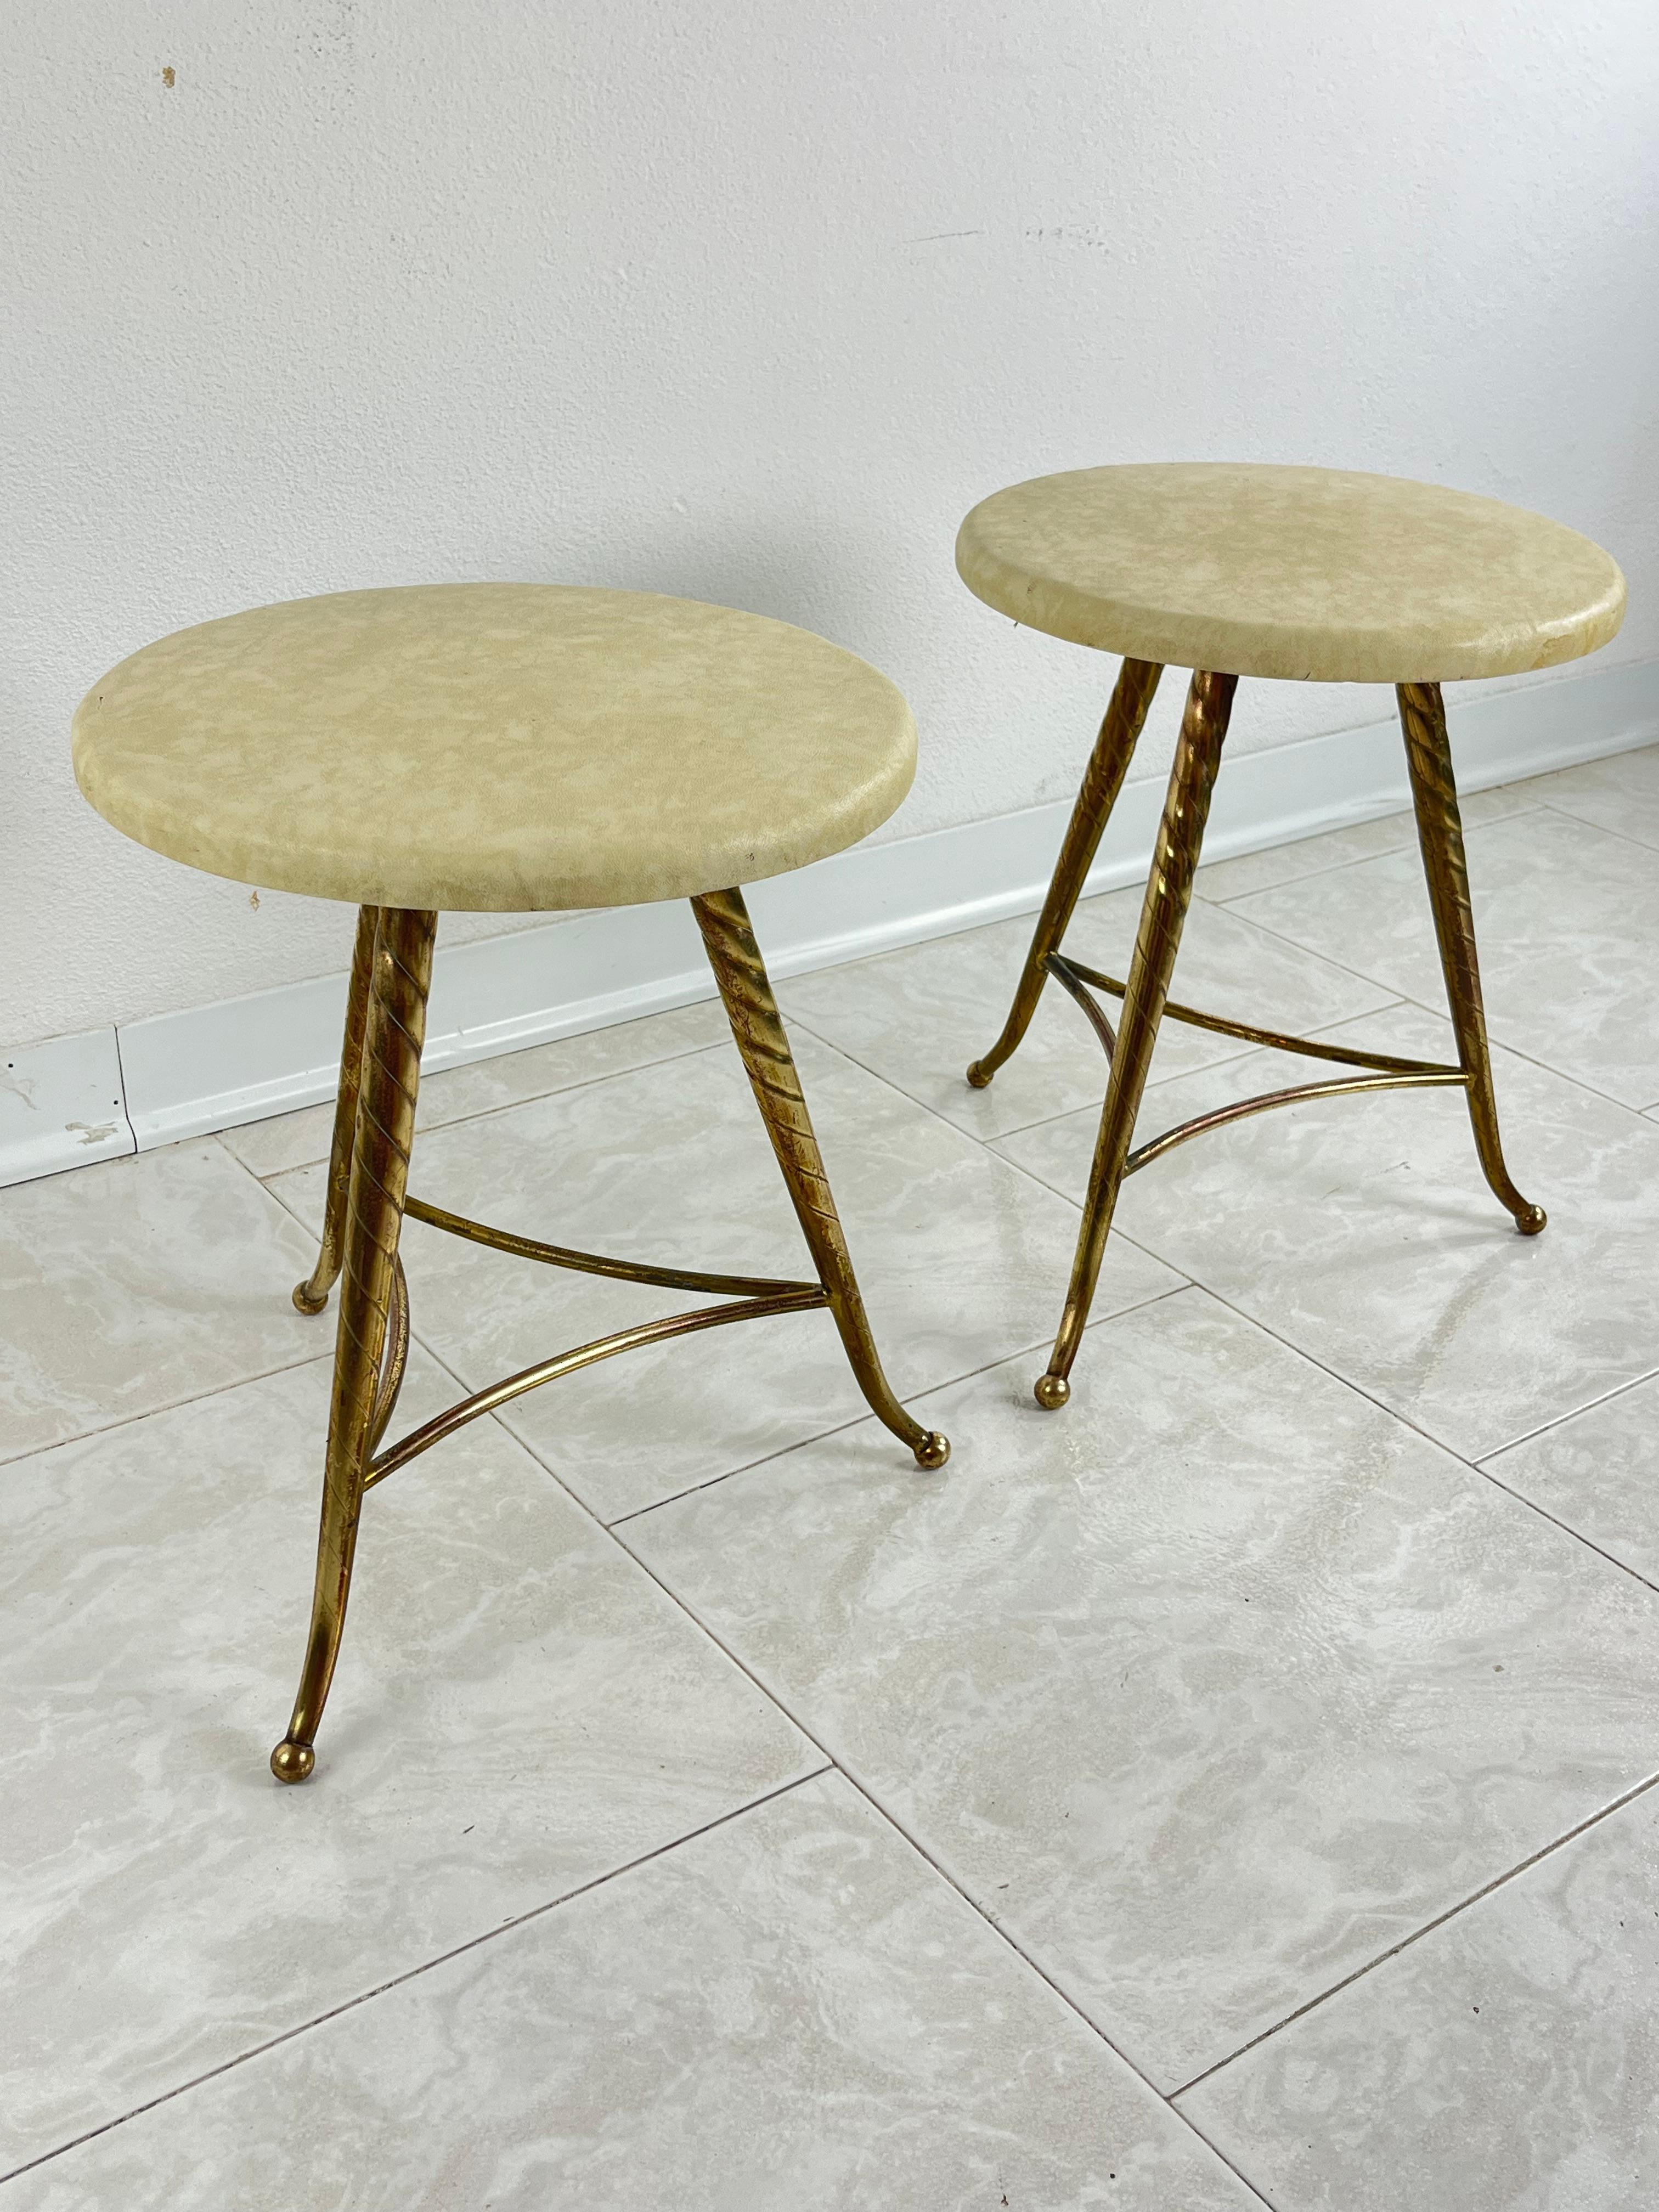 Set of 2 Mid-Century Brass Stools Attributed to Paolo Buffa 1950s In Good Condition For Sale In Palermo, IT